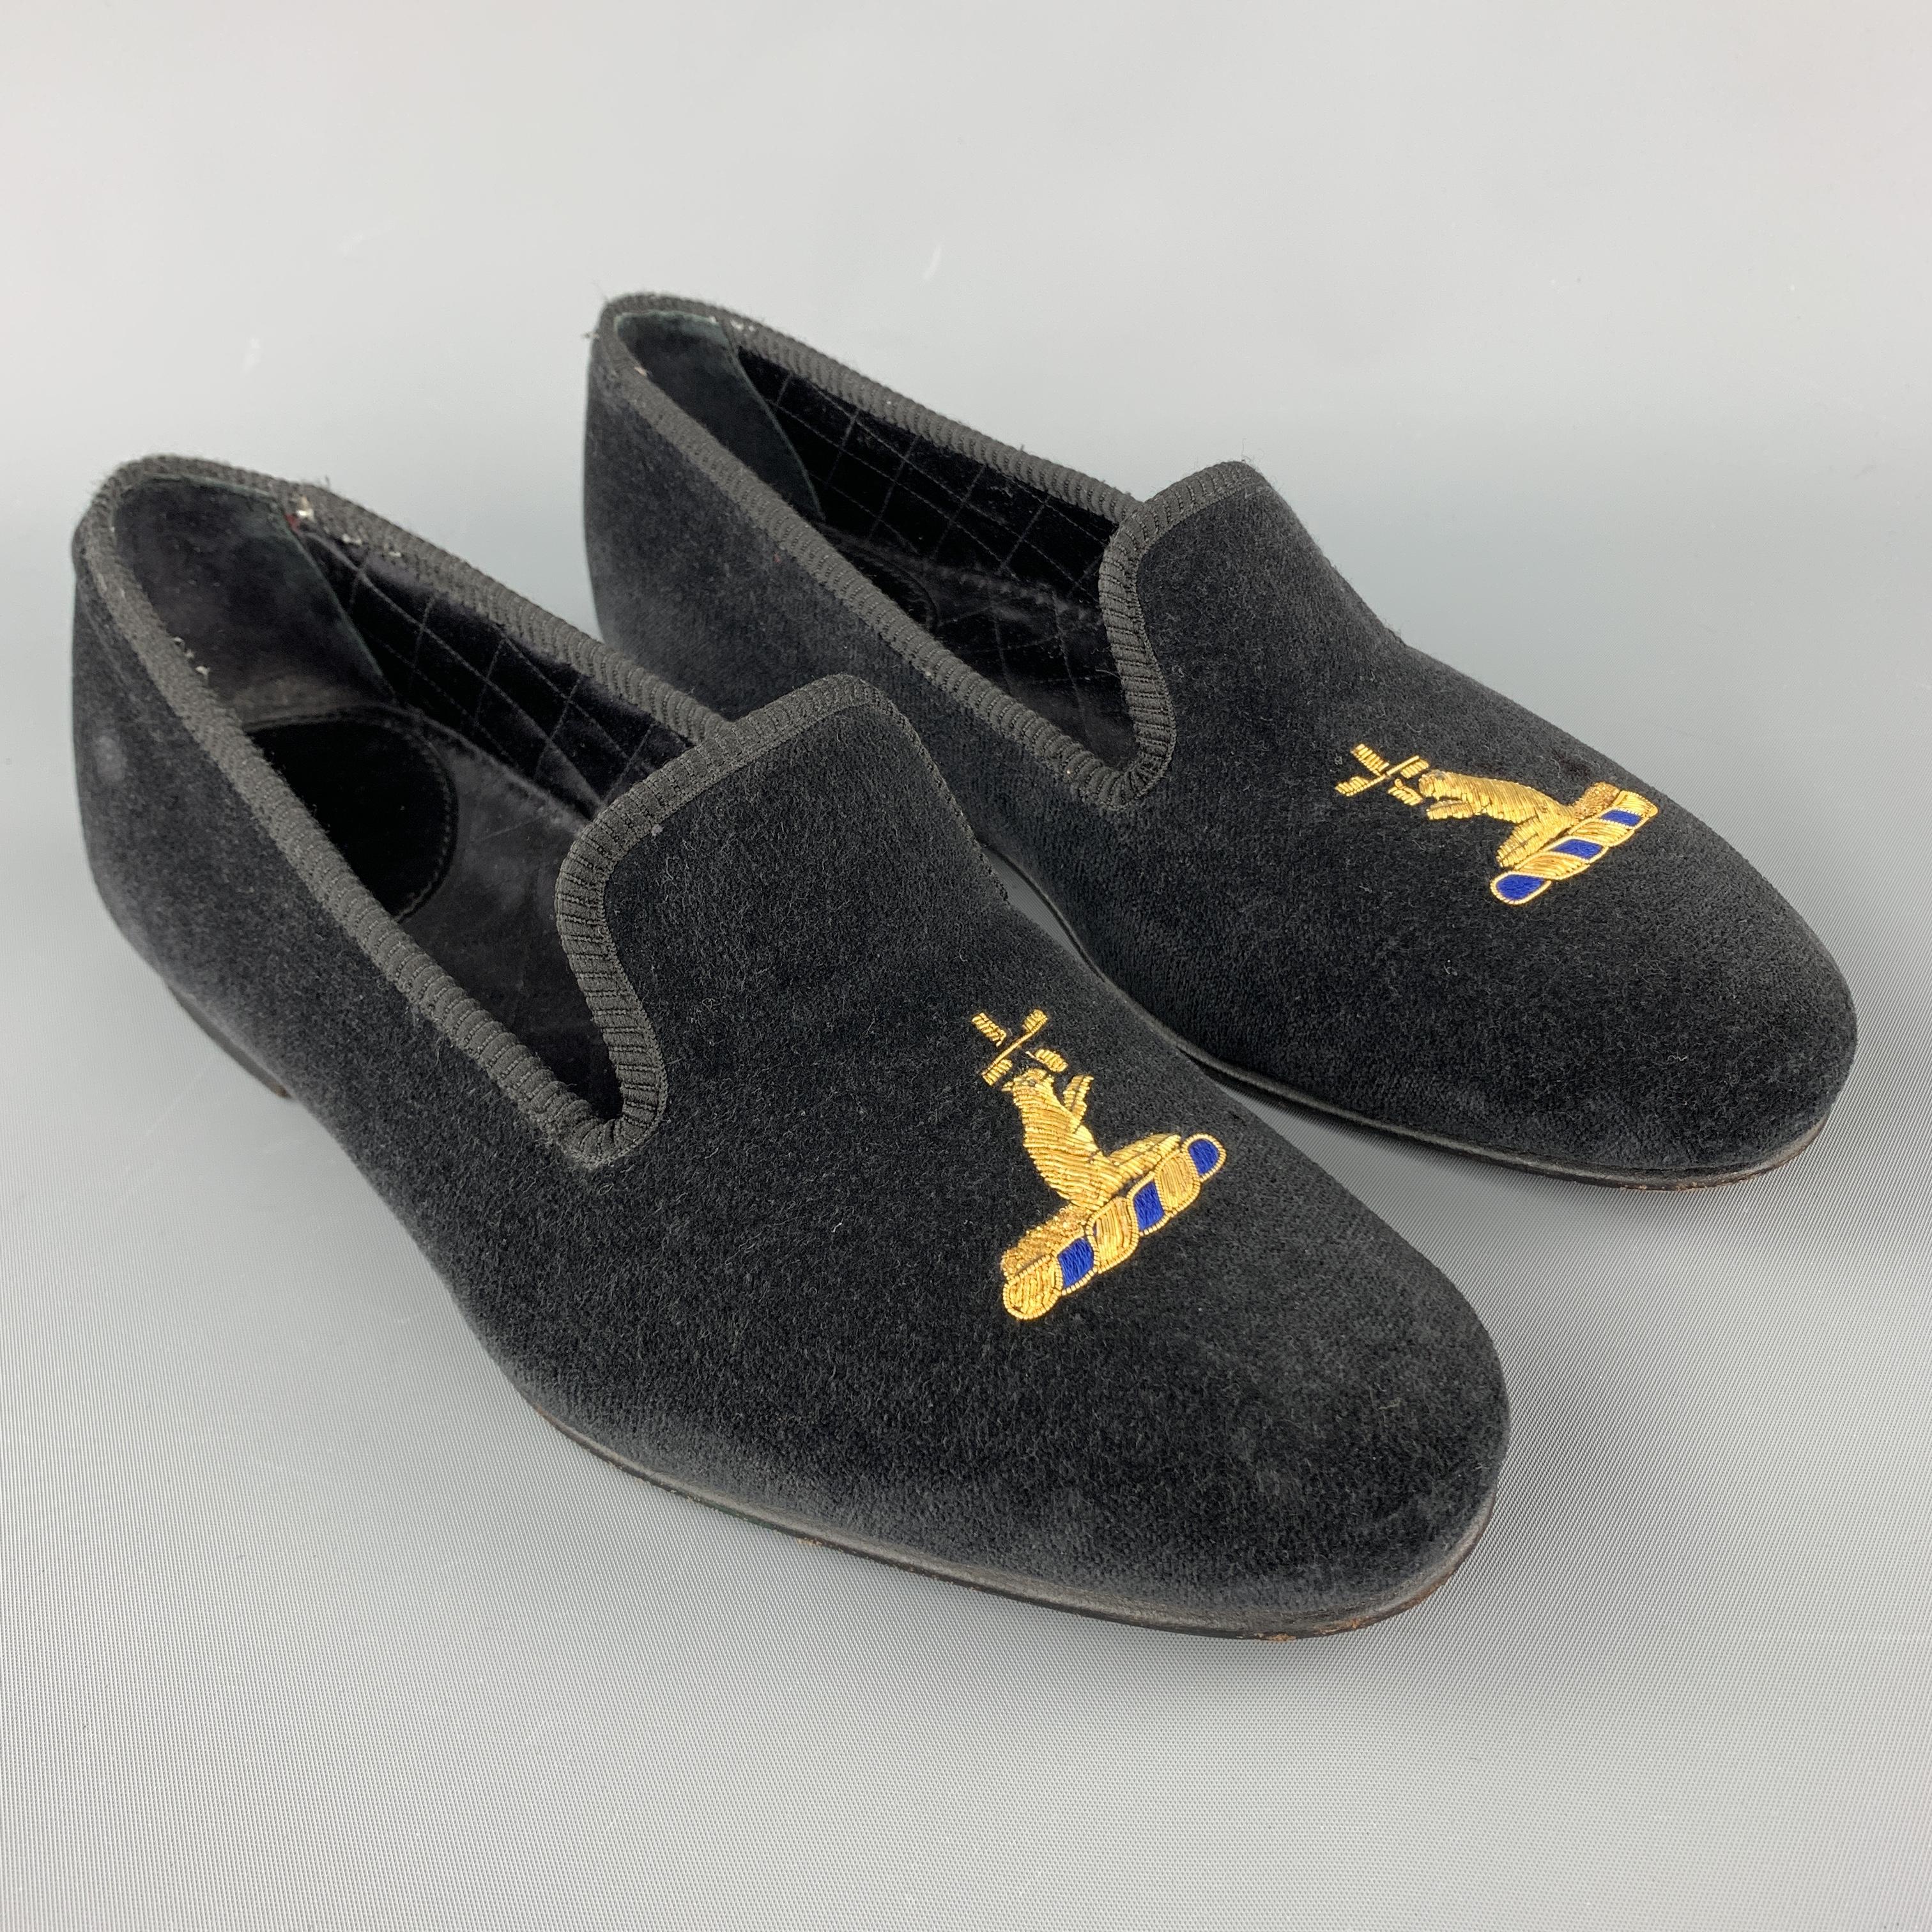 CUSTOM MADE Slippers Loafers comes in a solid black velvet material, with an embroidery at toe and a trim, a quilted sateen interior and a leather ousole. With shoe tree. Hand Made in England. 

Very Good Pre-Owned Condition.
Marked: 8

Outsole: 11